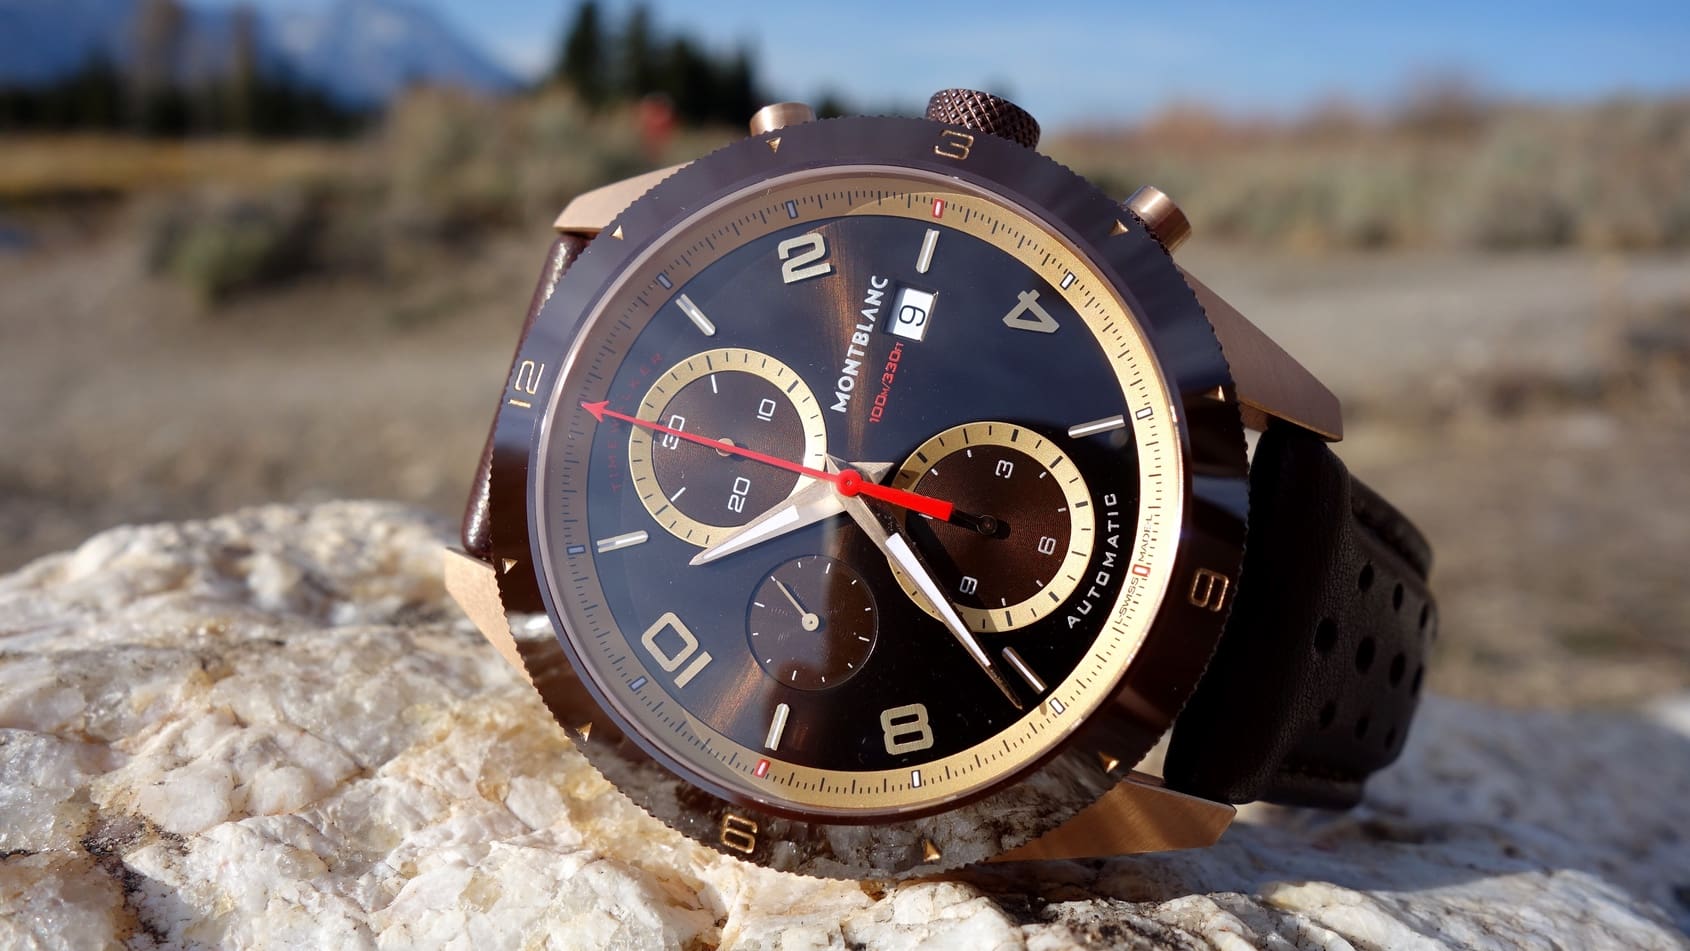 HANDS-ON: The Montblanc TimeWalker Chronograph in red gold with brown dial